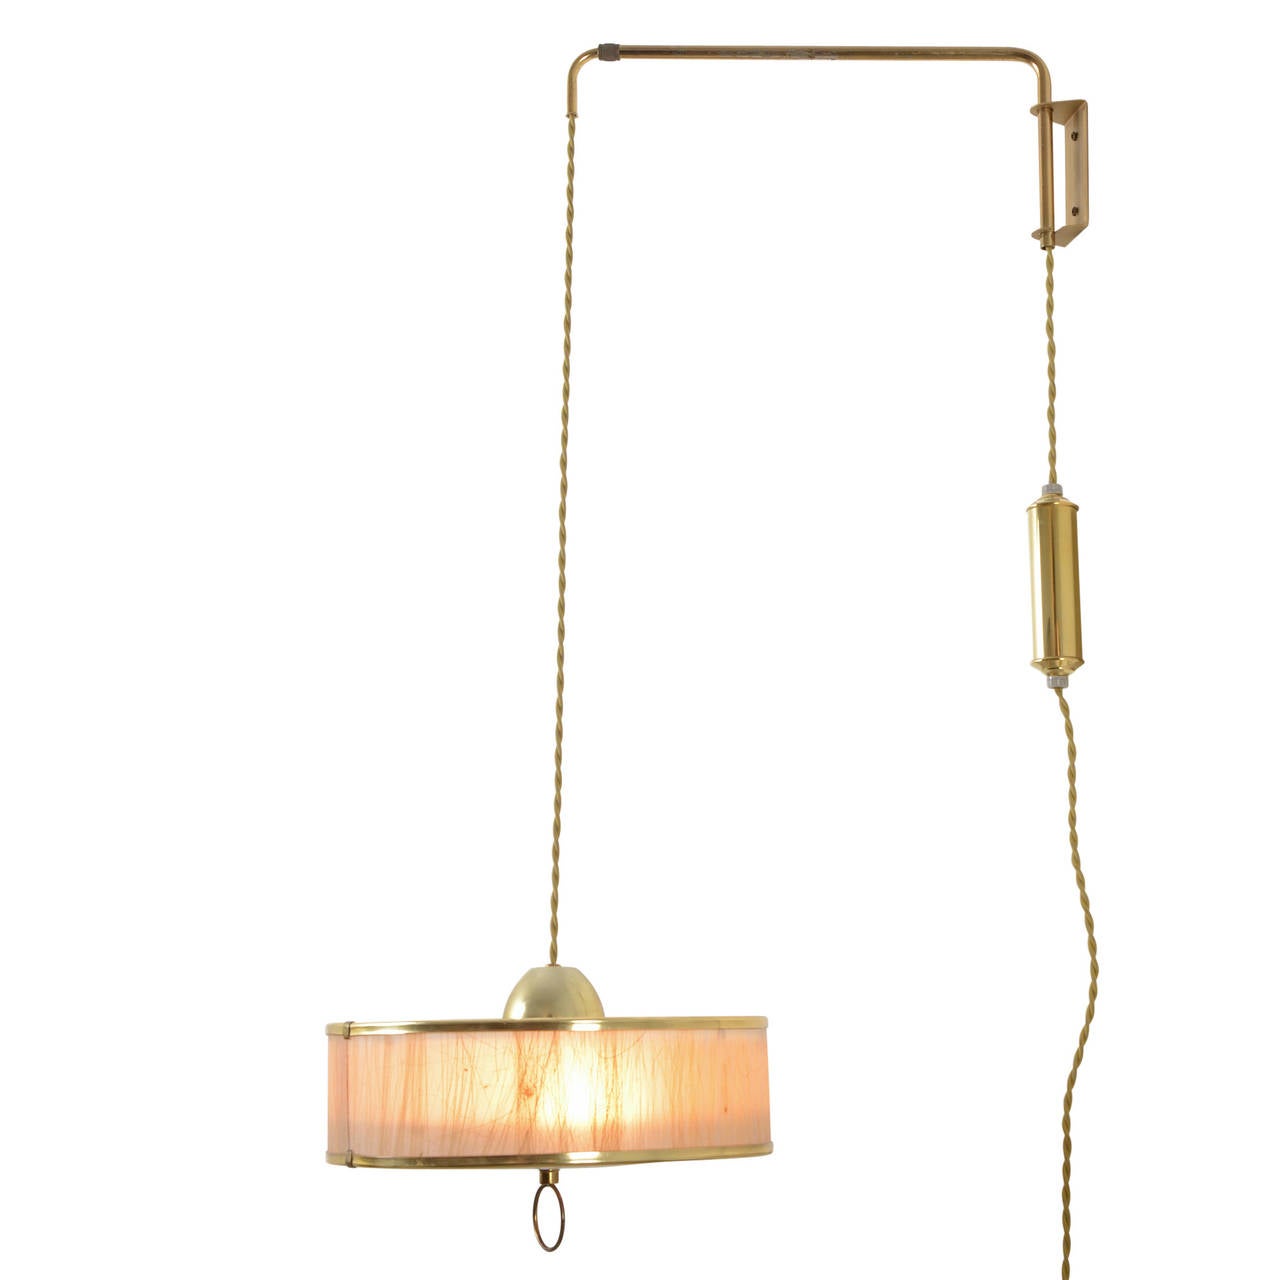 What's not to love about this engaging wall-mounted light? We're enamored by the versatility, which allows the lamp to move along both a vertical and horizontal axis. The swing arm moves the brass and mica-laden shade left and right, while the